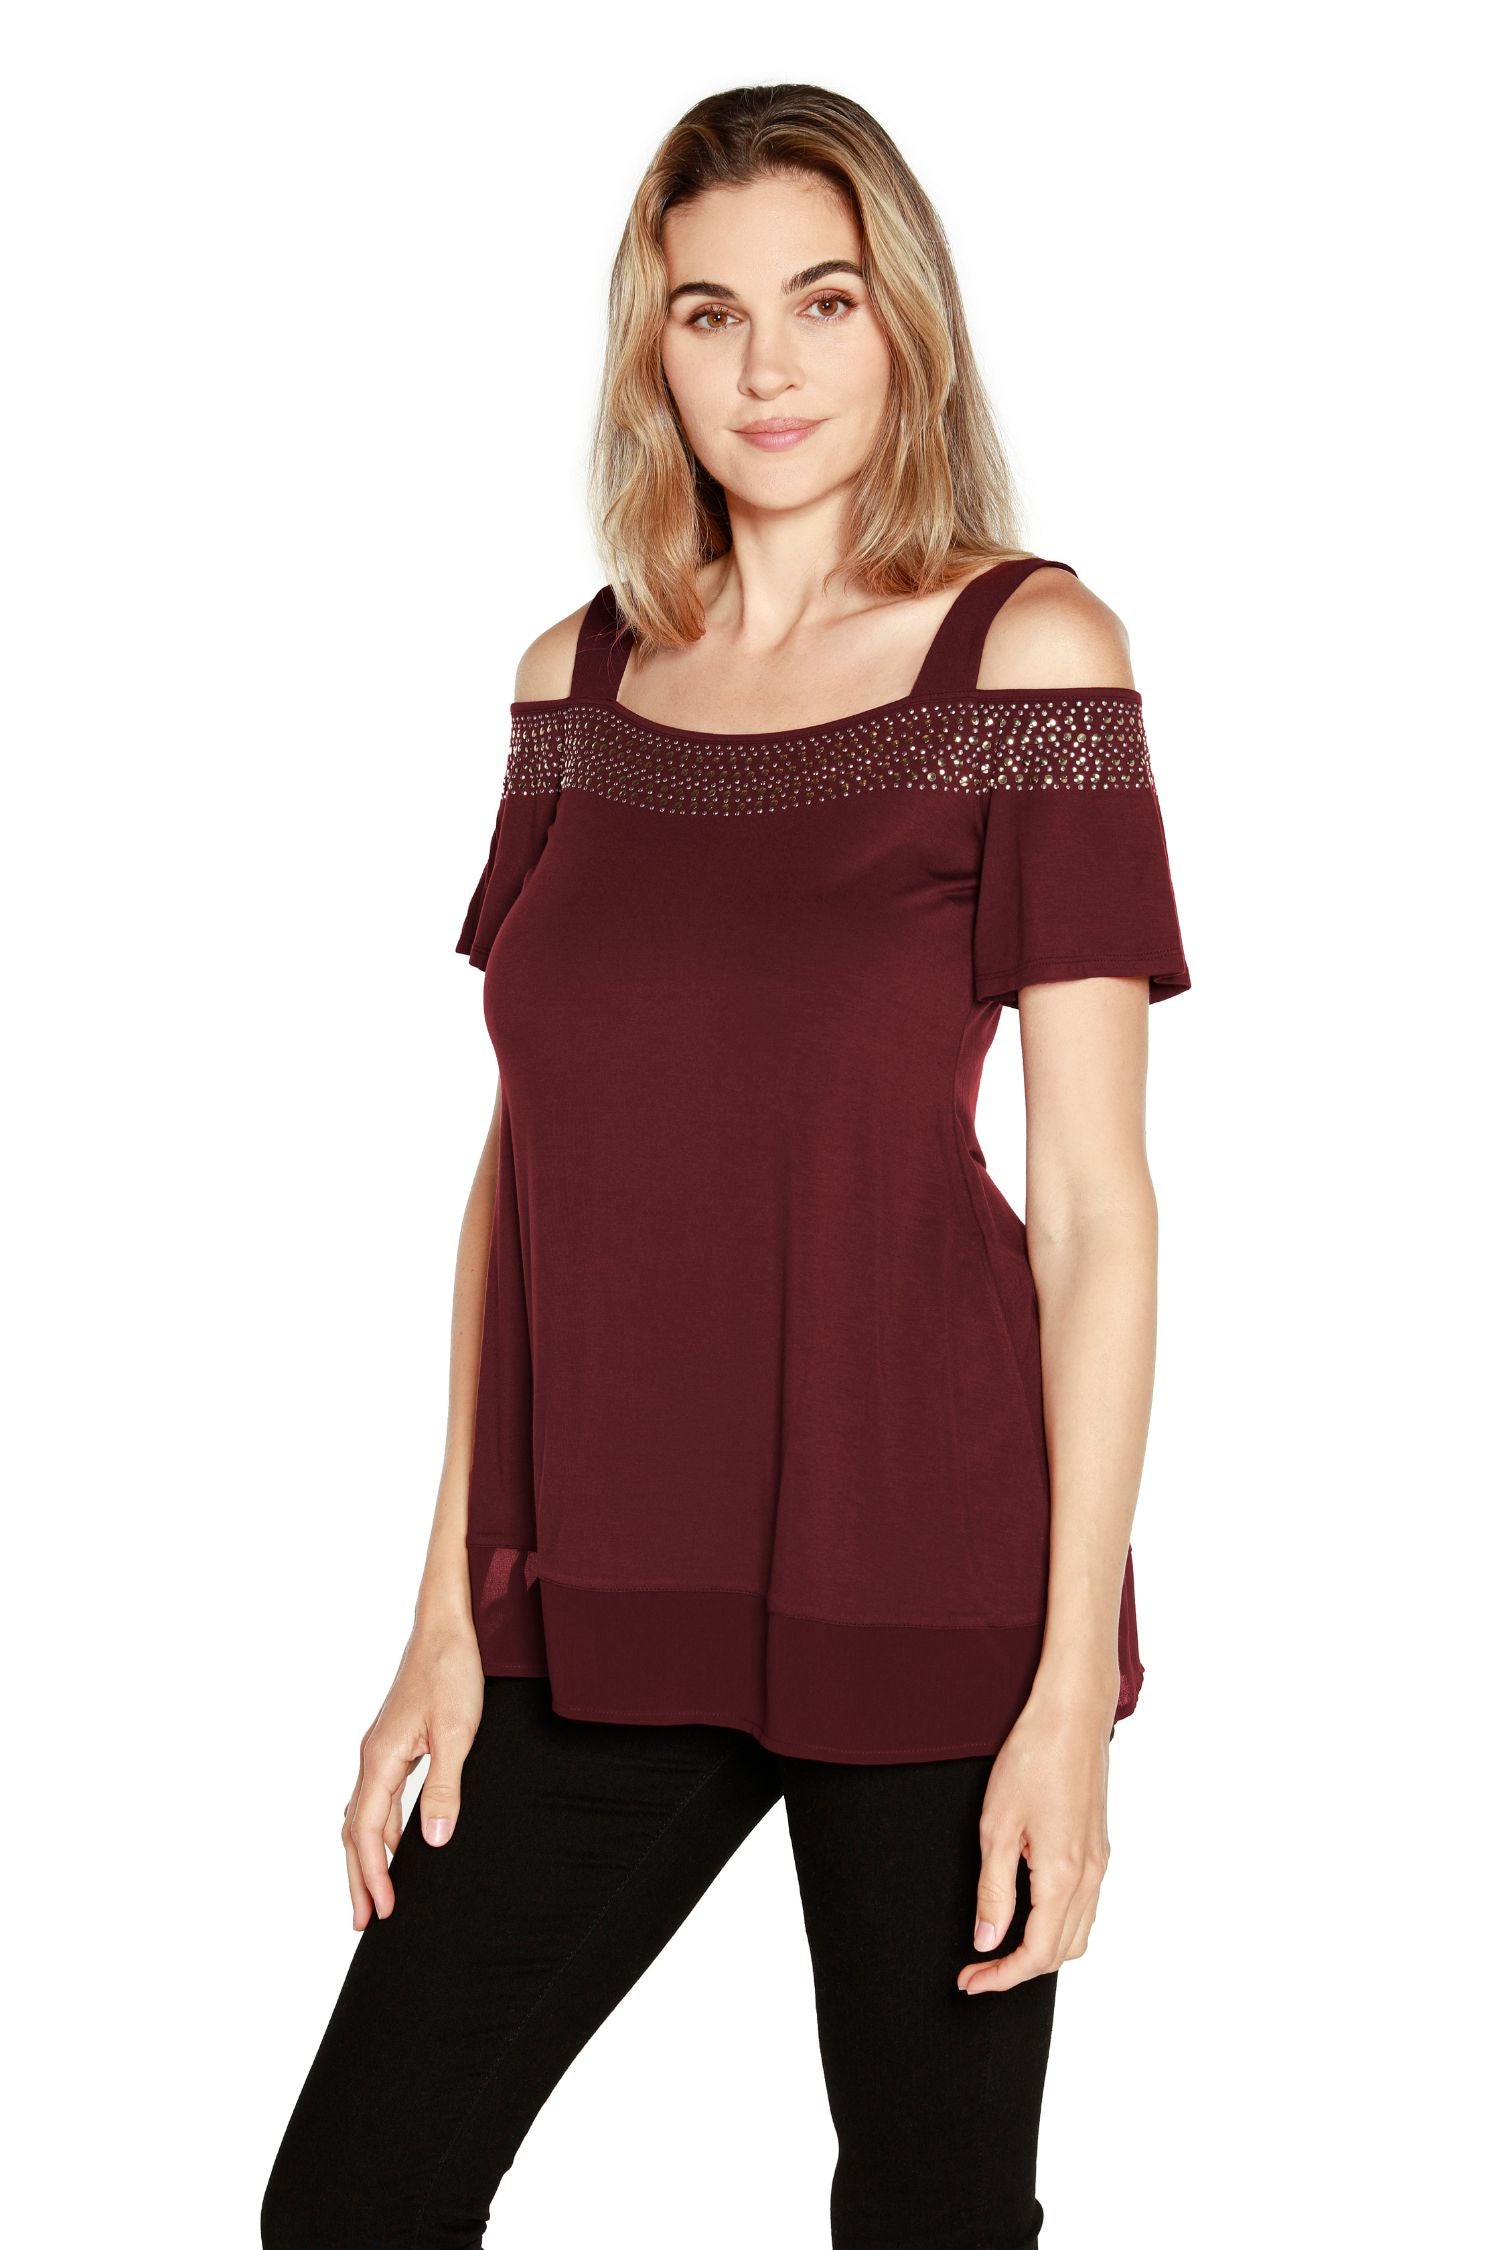 Women's Flutter Sleeve Cold Shoulder Pull Over Top with Stud and Sequin Trim